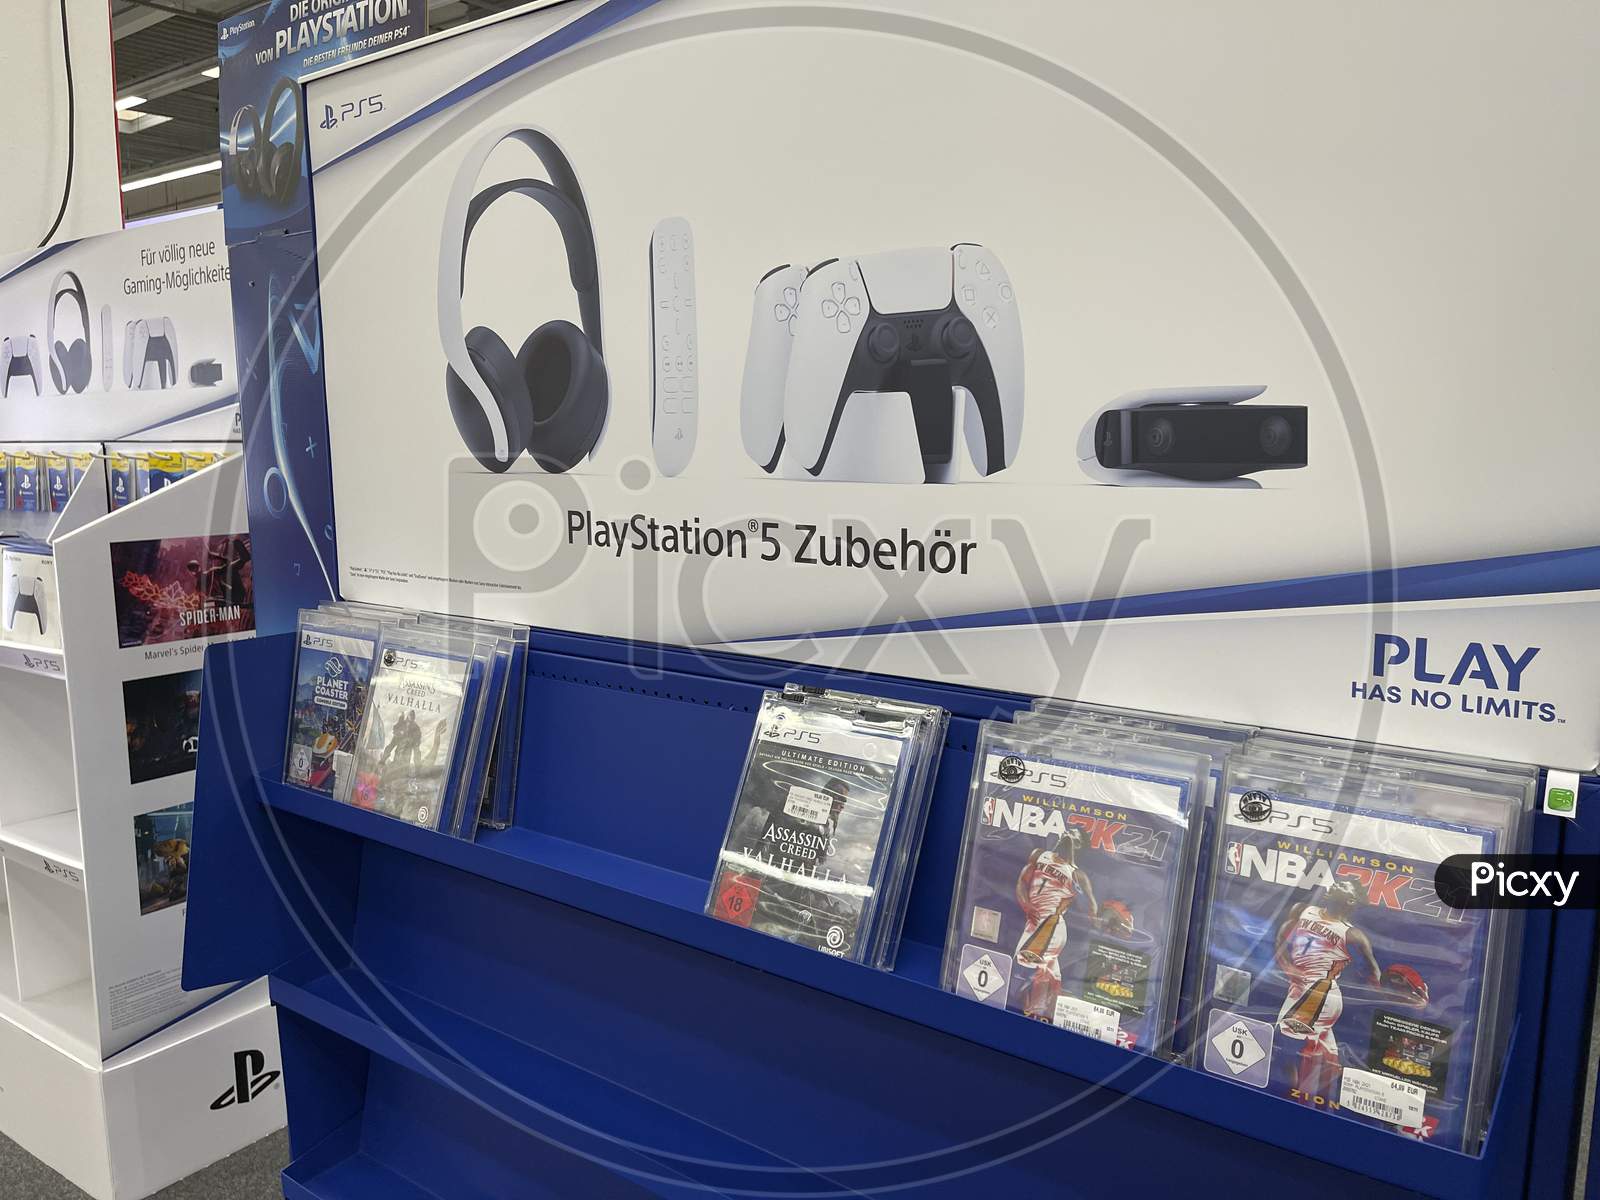 Frankfurt, Germany - 14th November 2020: A german photographer looking for the new Playstation 5 (PS 5) in a Saturn market, taking pictures of the first available games for the console.